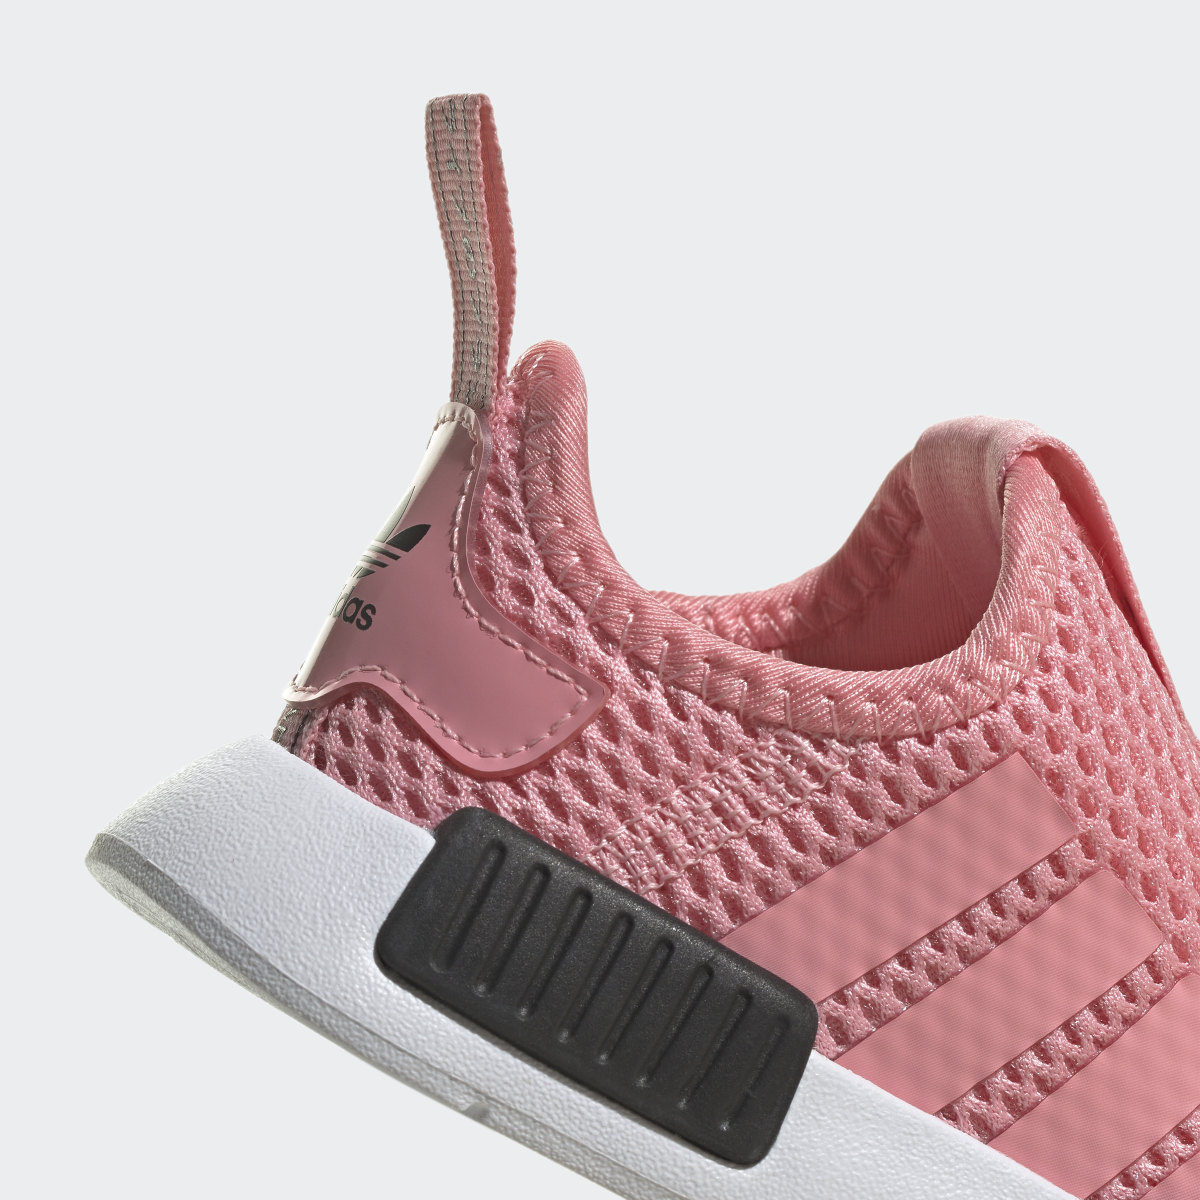 Adidas NMD 360 Shoes. 8